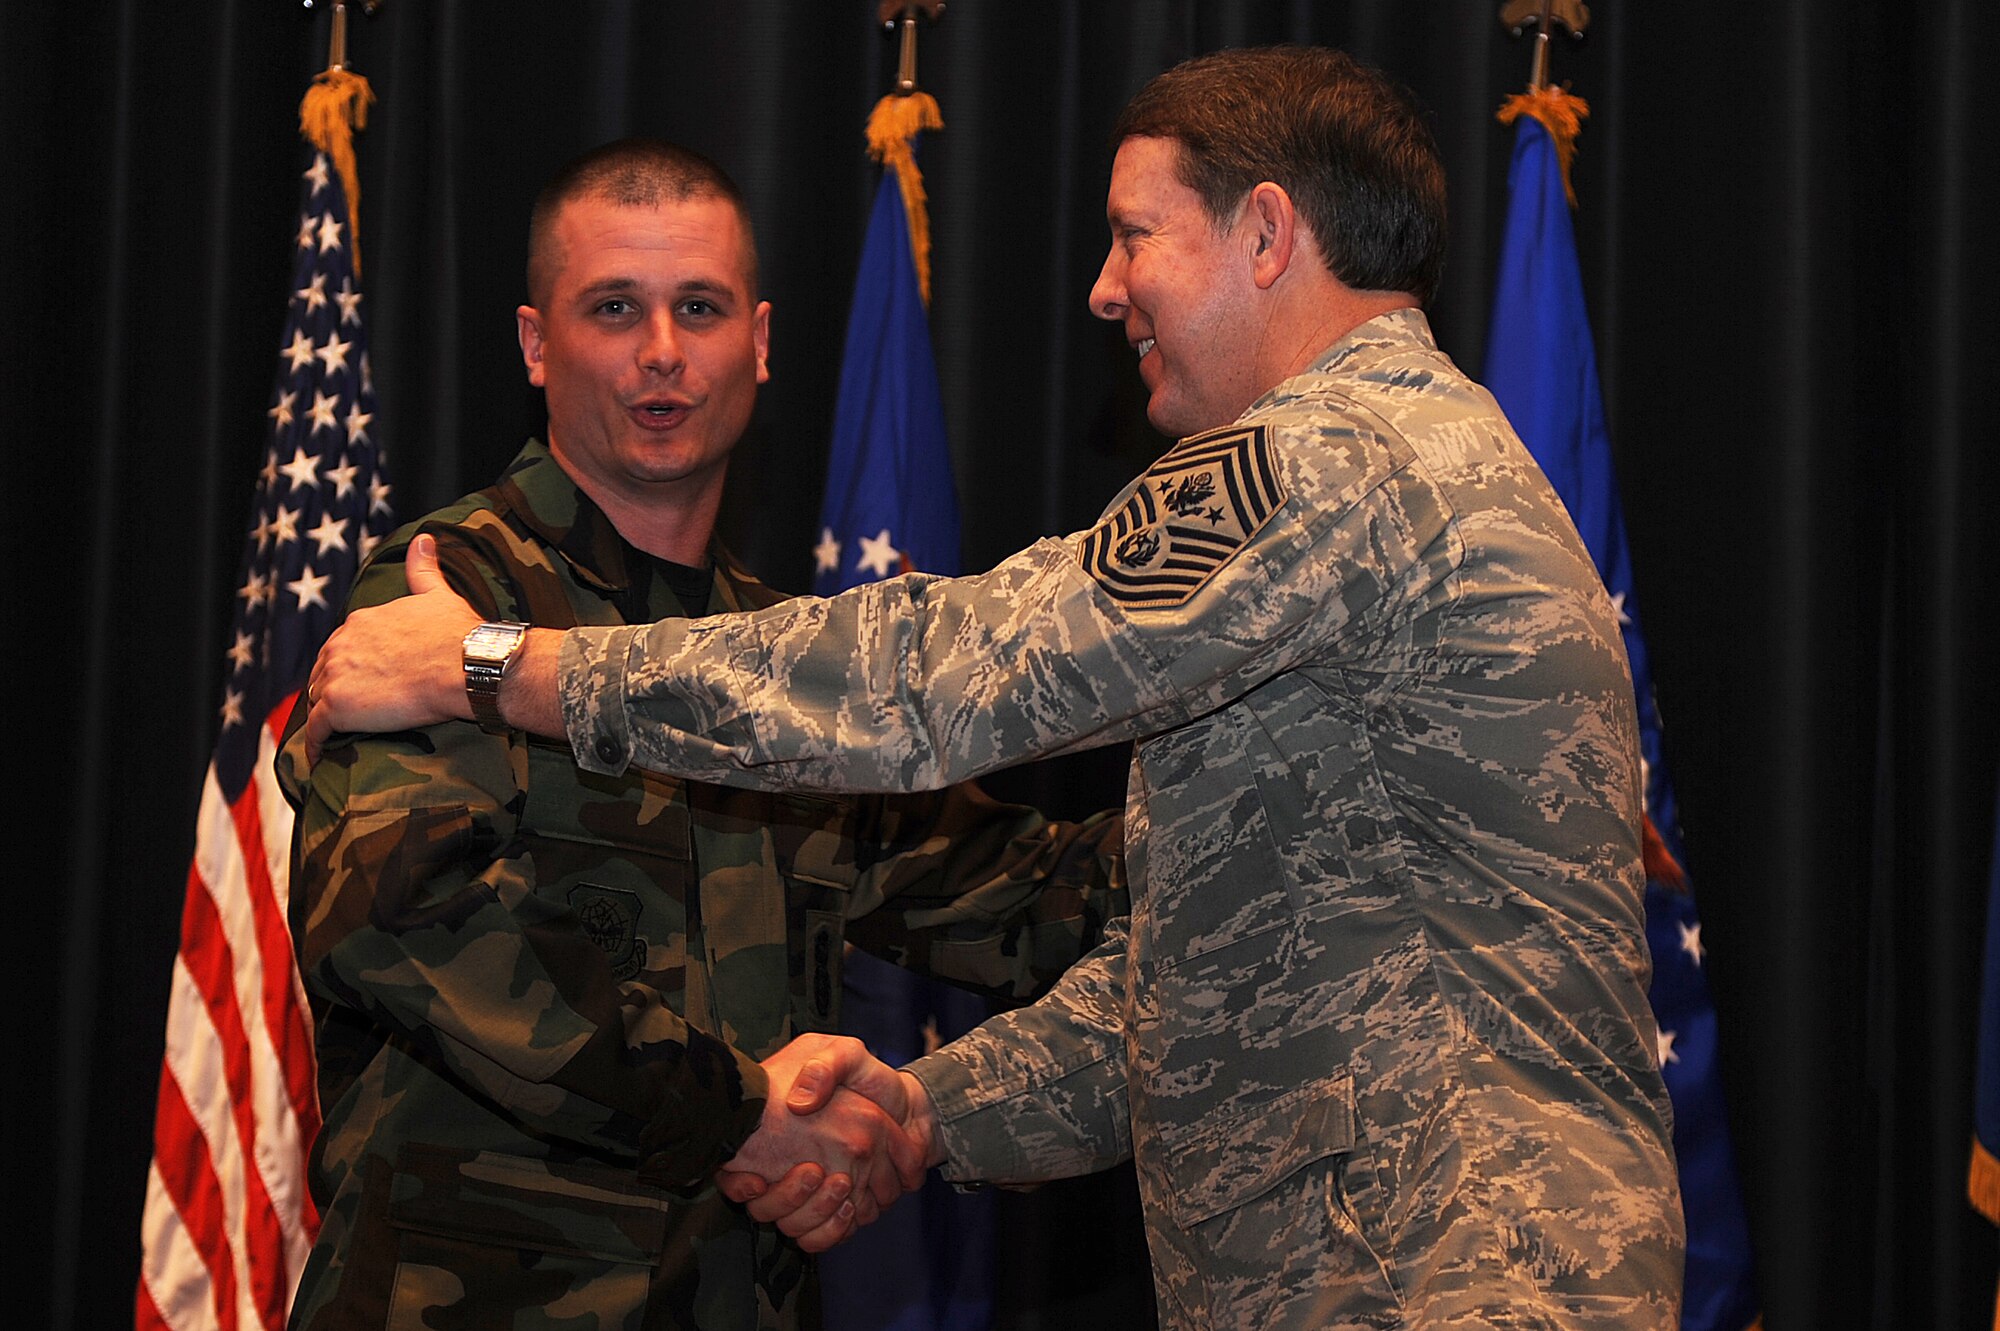 Staff Sgt. Jonathan Tourville, 421st Combat Training Squadron assistant NCO in charge of the Advanced Contingency Skills Training Course, shakes hands with Chief Master Sgt. of the Air Force Rodney McKinley during Chief McKinley’s visit to the Expeditionary Center at Fort Dix, N.J., Feb. 10, 2009. Sergeant Tourville was promoted to technical sergeant through the Stripes for Exceptional Performers Program by Maj. Gen. Kip Self, U.S. Air Force Expeditionary Center commander.  (U.S. Air Force Photo/Staff Sgt. Nathan Bevier)